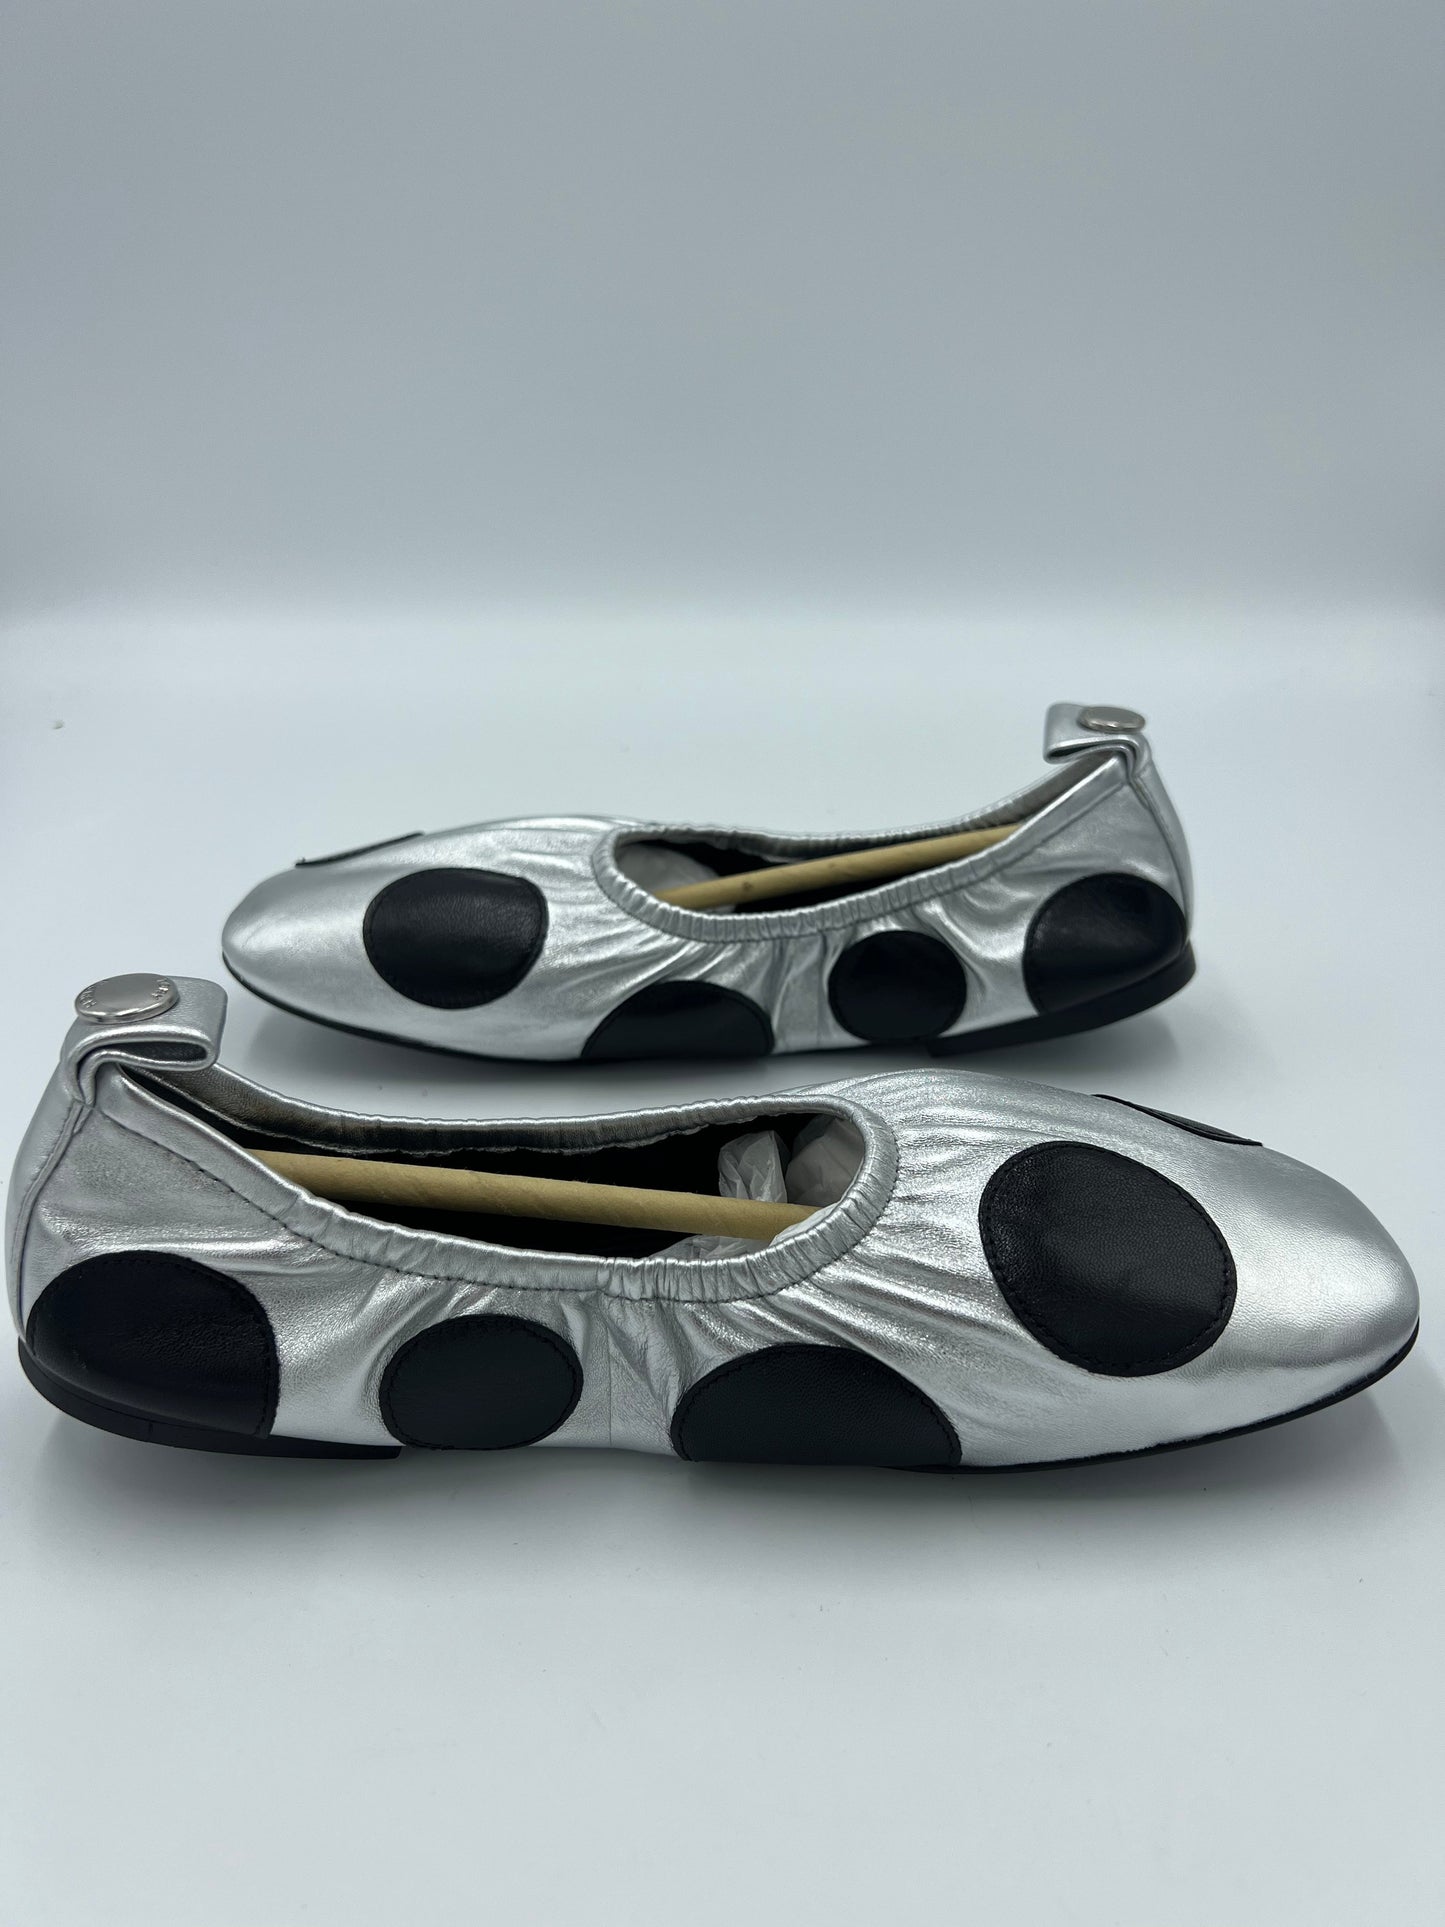 Like New! Silver Shoes Designer Tory Burch, Size 8